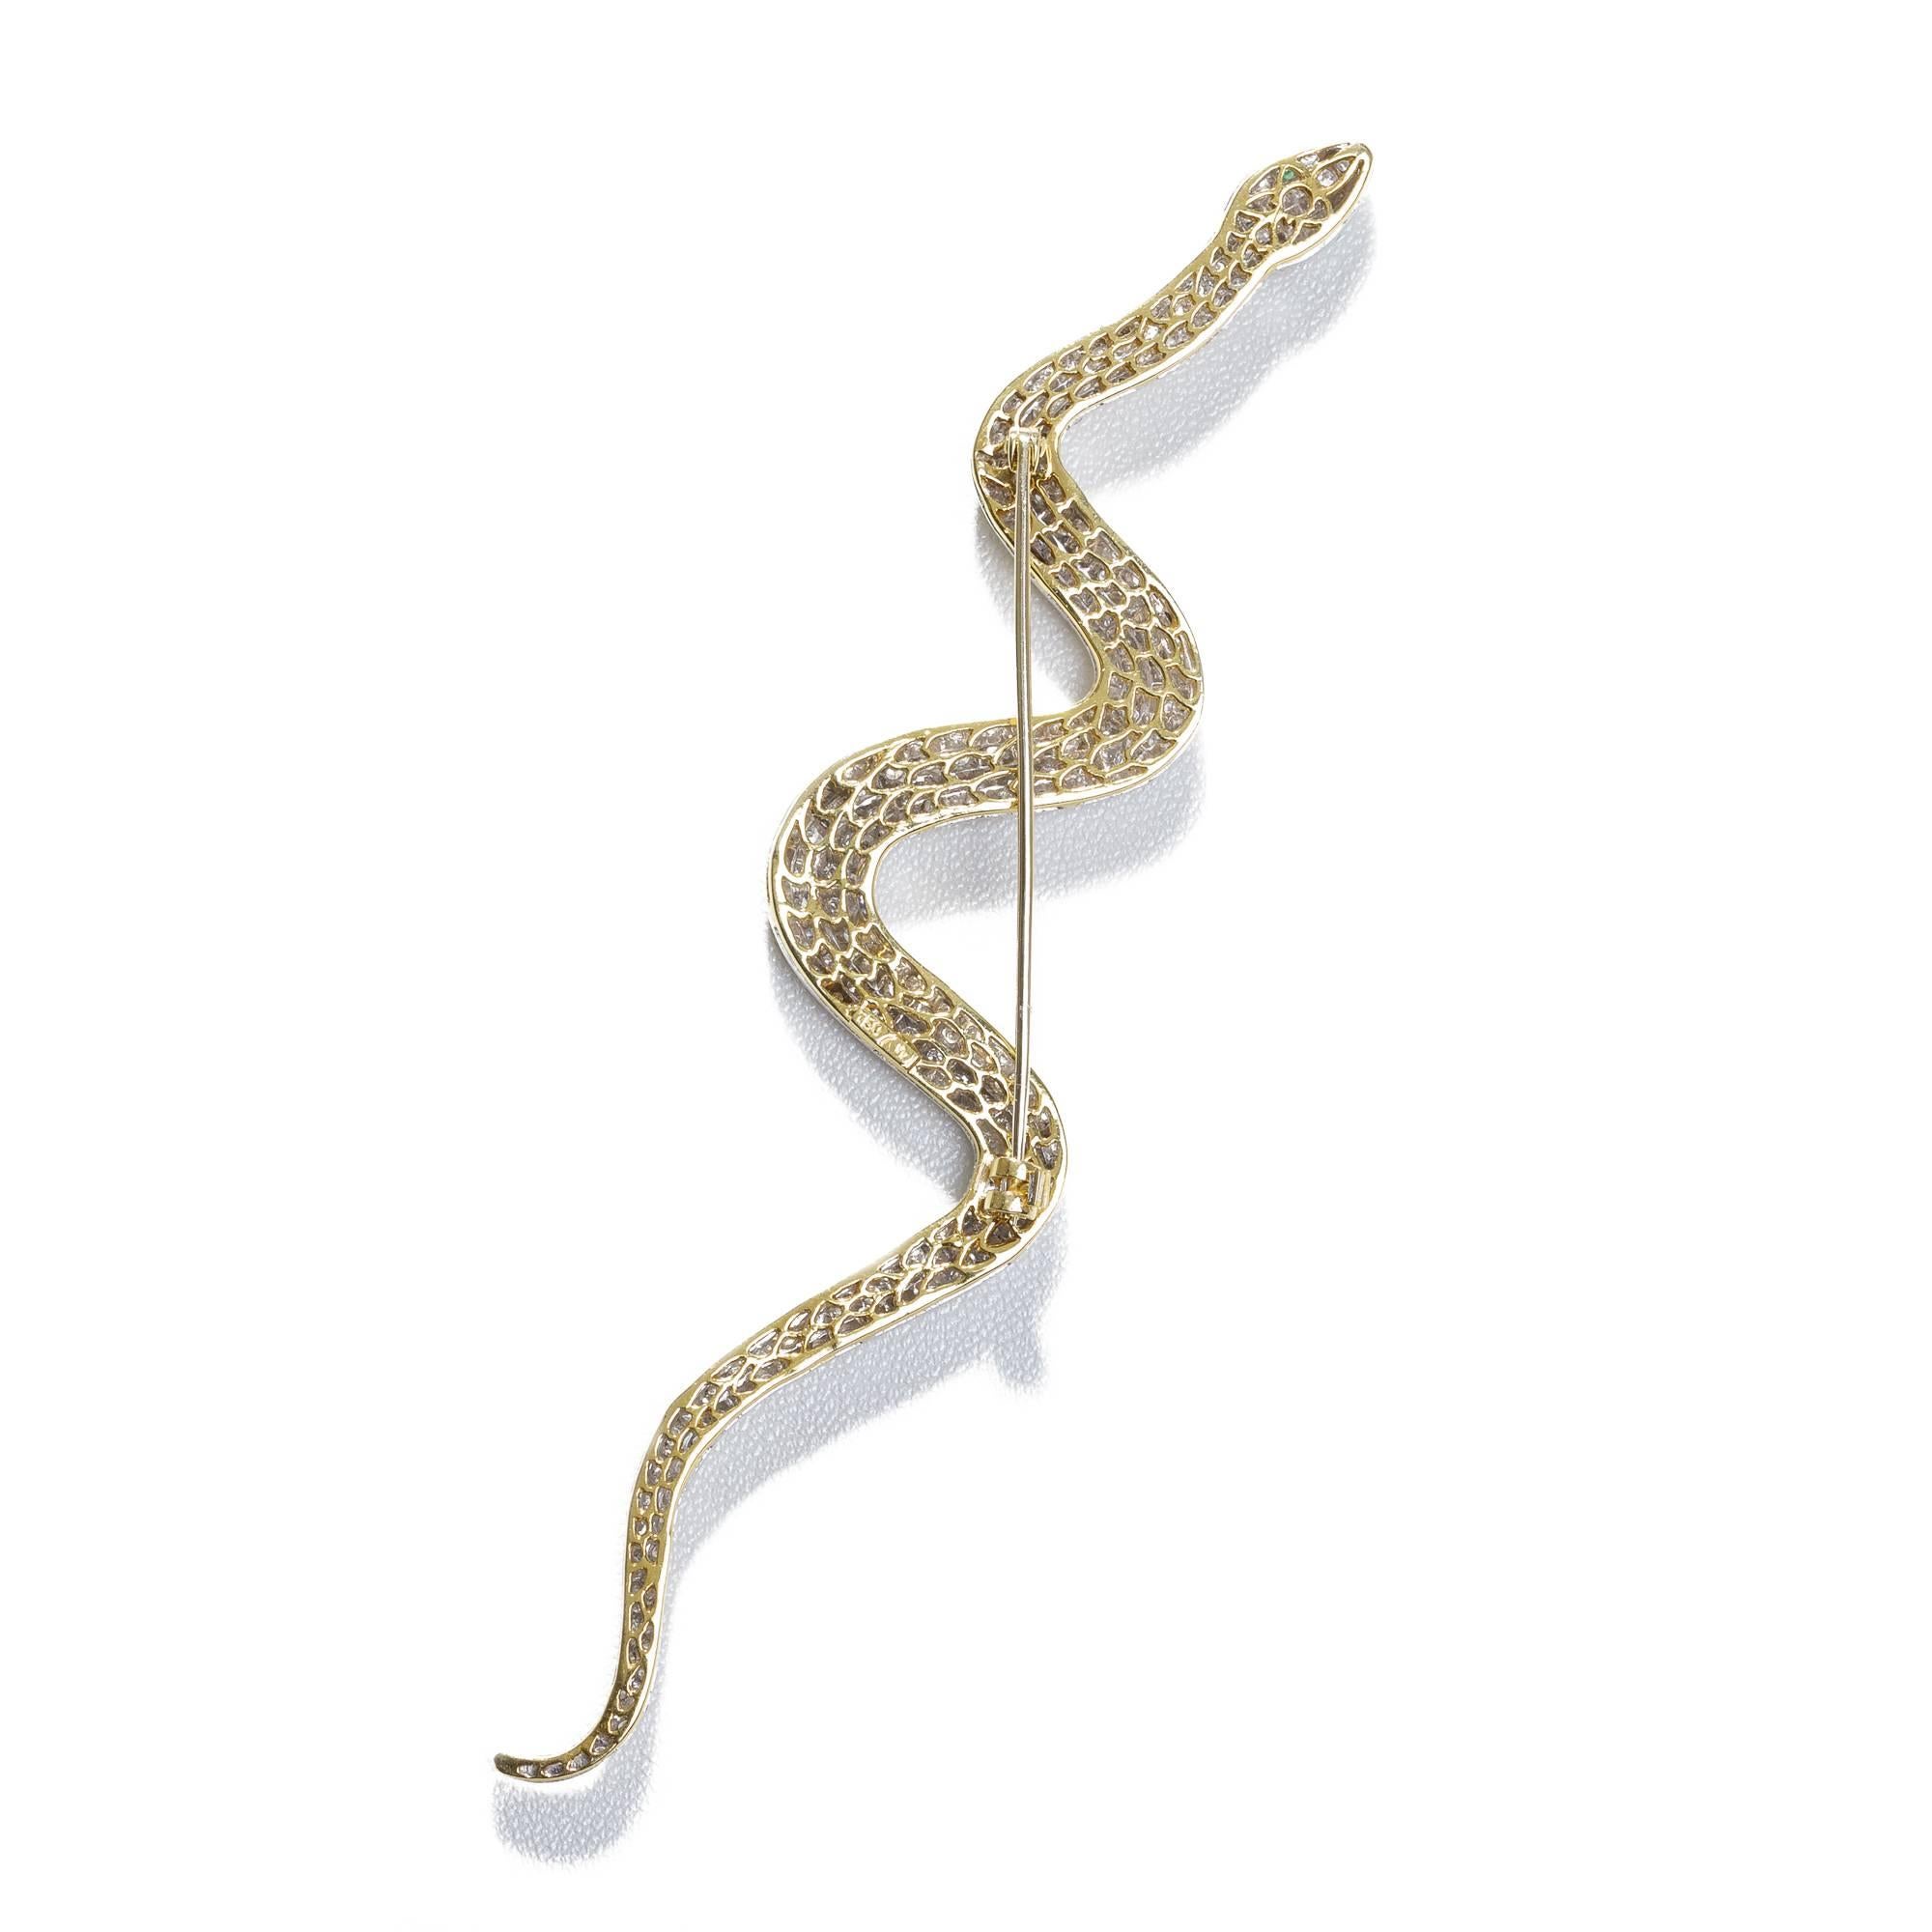 This intricate vintage snake pin is completely handmade, even the clasp. The body of the serpent is made of 18k white and yellow gold and is set with approximately 1.50 ct. of round diamonds. The snake's eyes are set with two cabochon-cut emeralds.